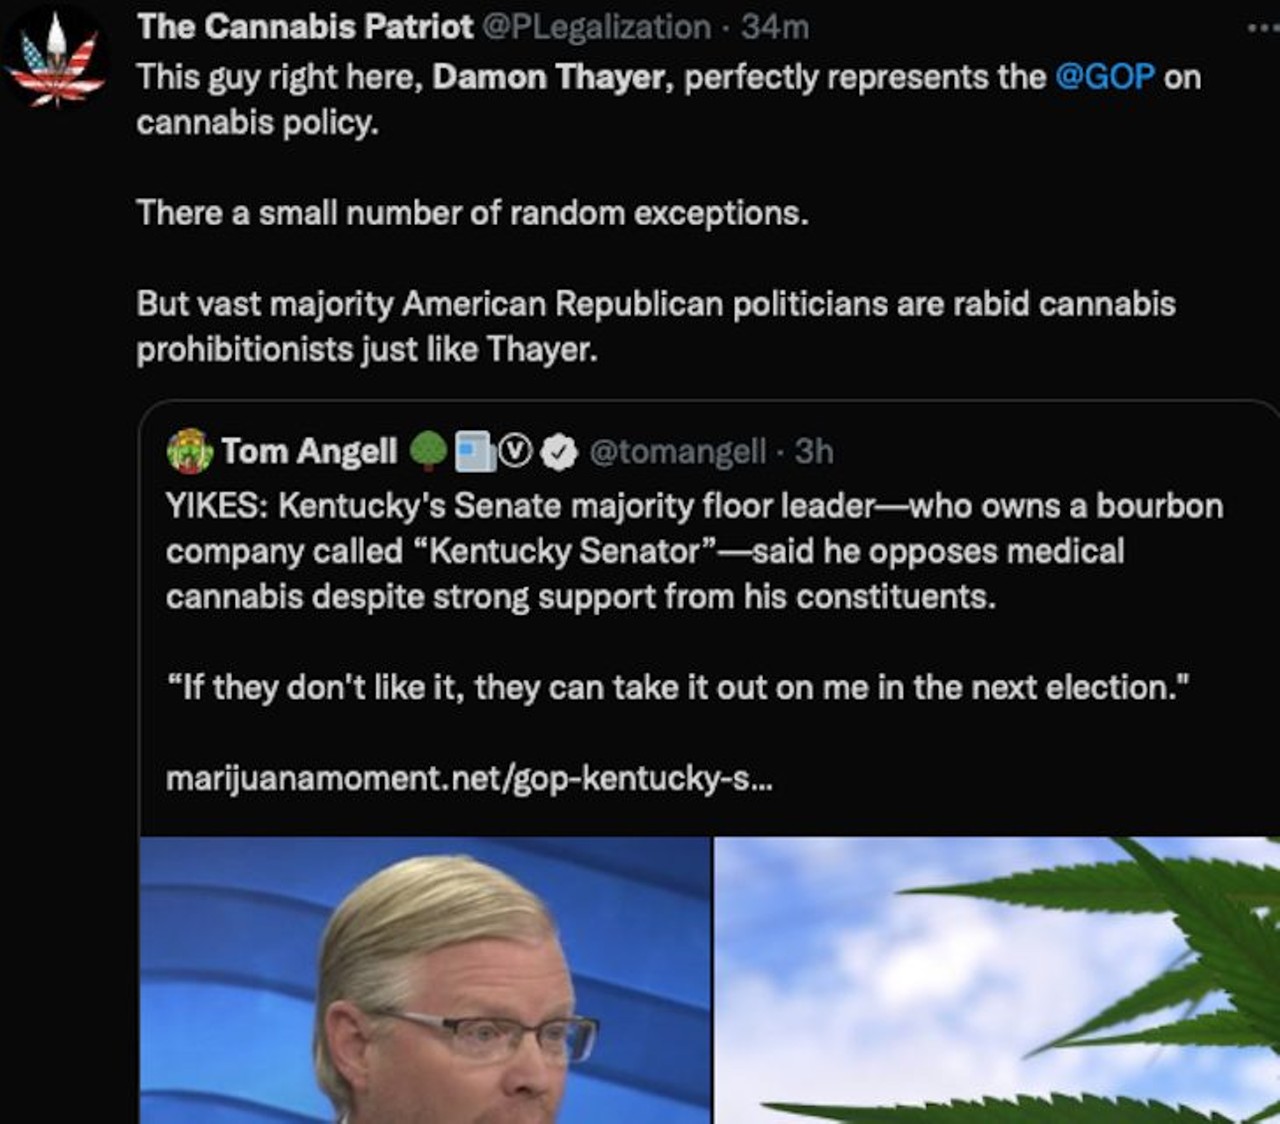 This Kentucky Senate Leader Said He Won't Support Medical Marijuana, And People Are Pissed